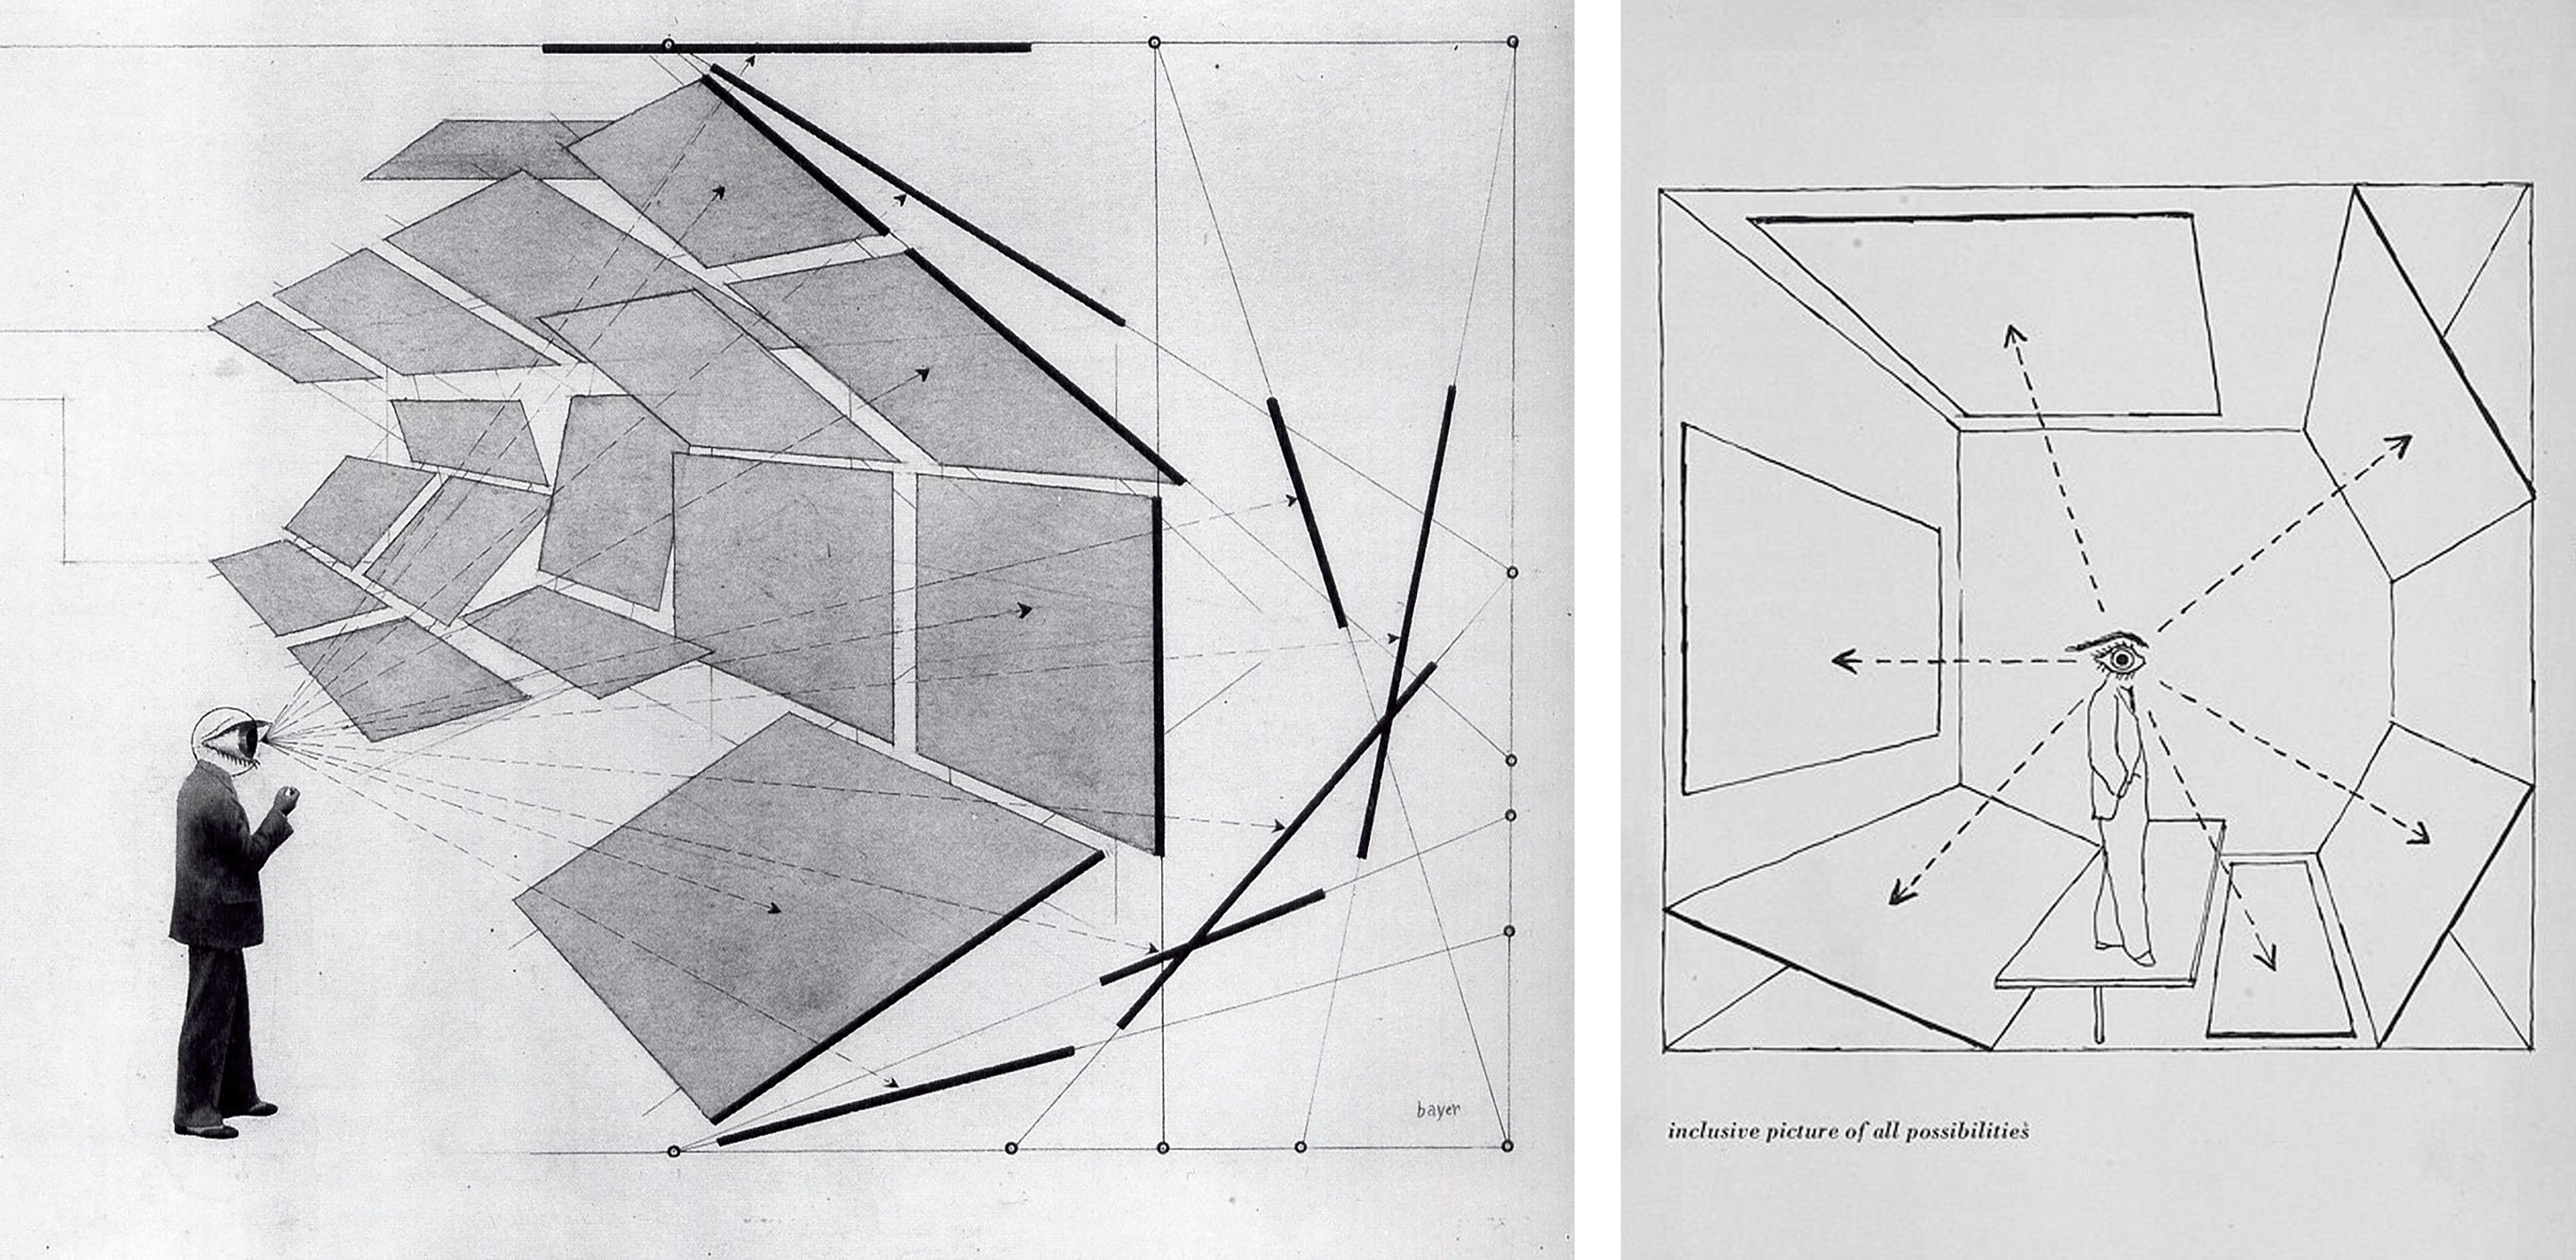 Herbert Bayer, Diagram of the Field of Vision (1930) and "Fundamentals of Exhibition Design" (p. 25, 1939)